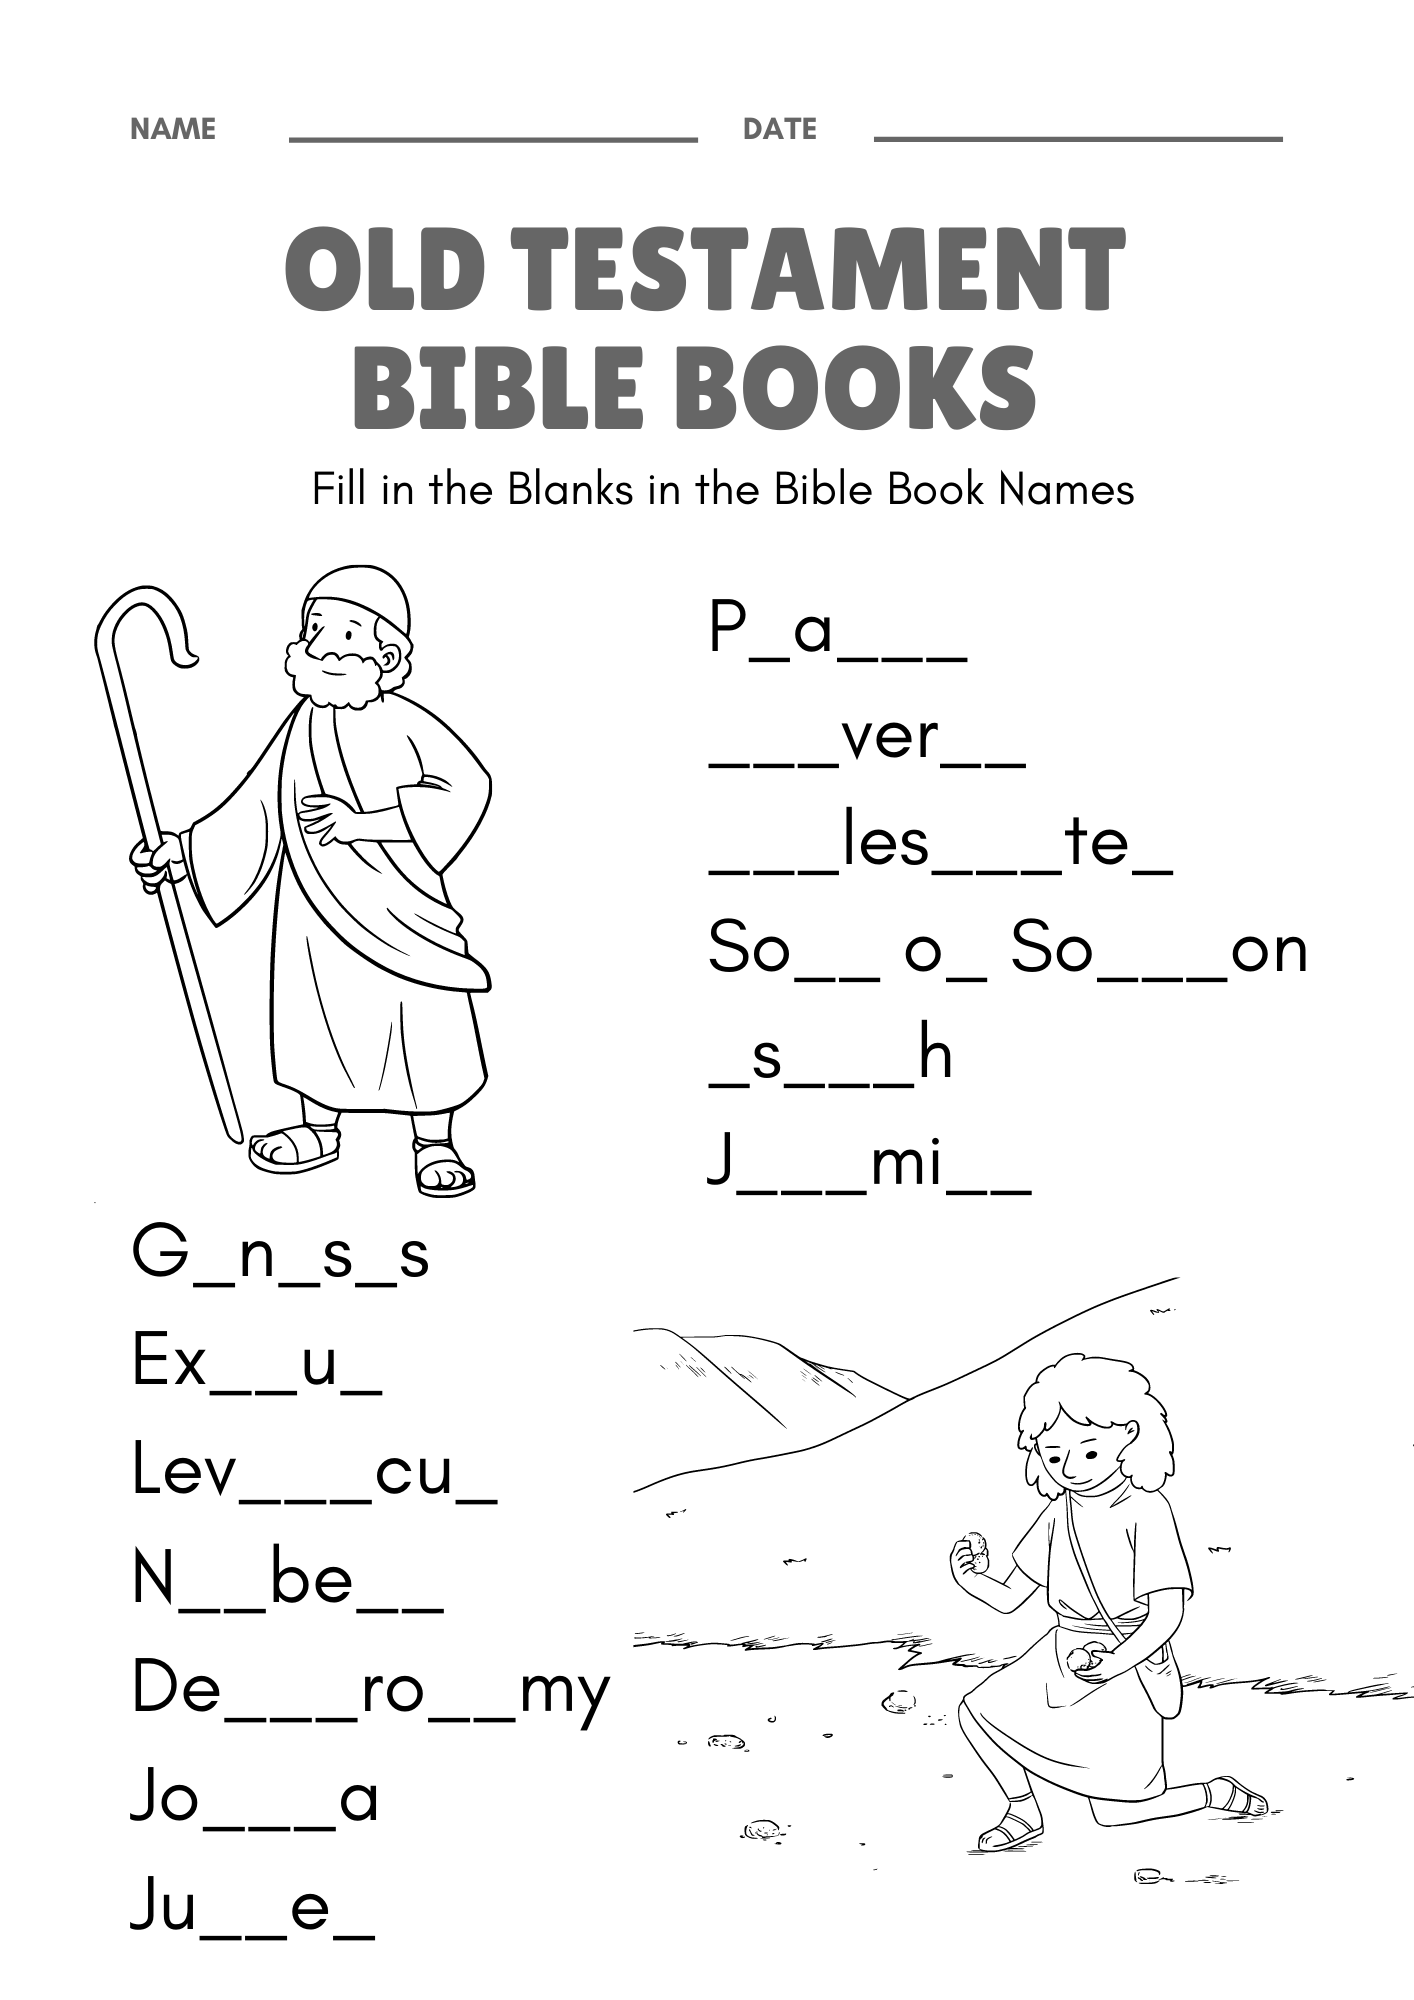 Engaging Printable Activity Sheets For Exploring Books Of The Bible - Free Printable Children's Bible Lessons Worksheets